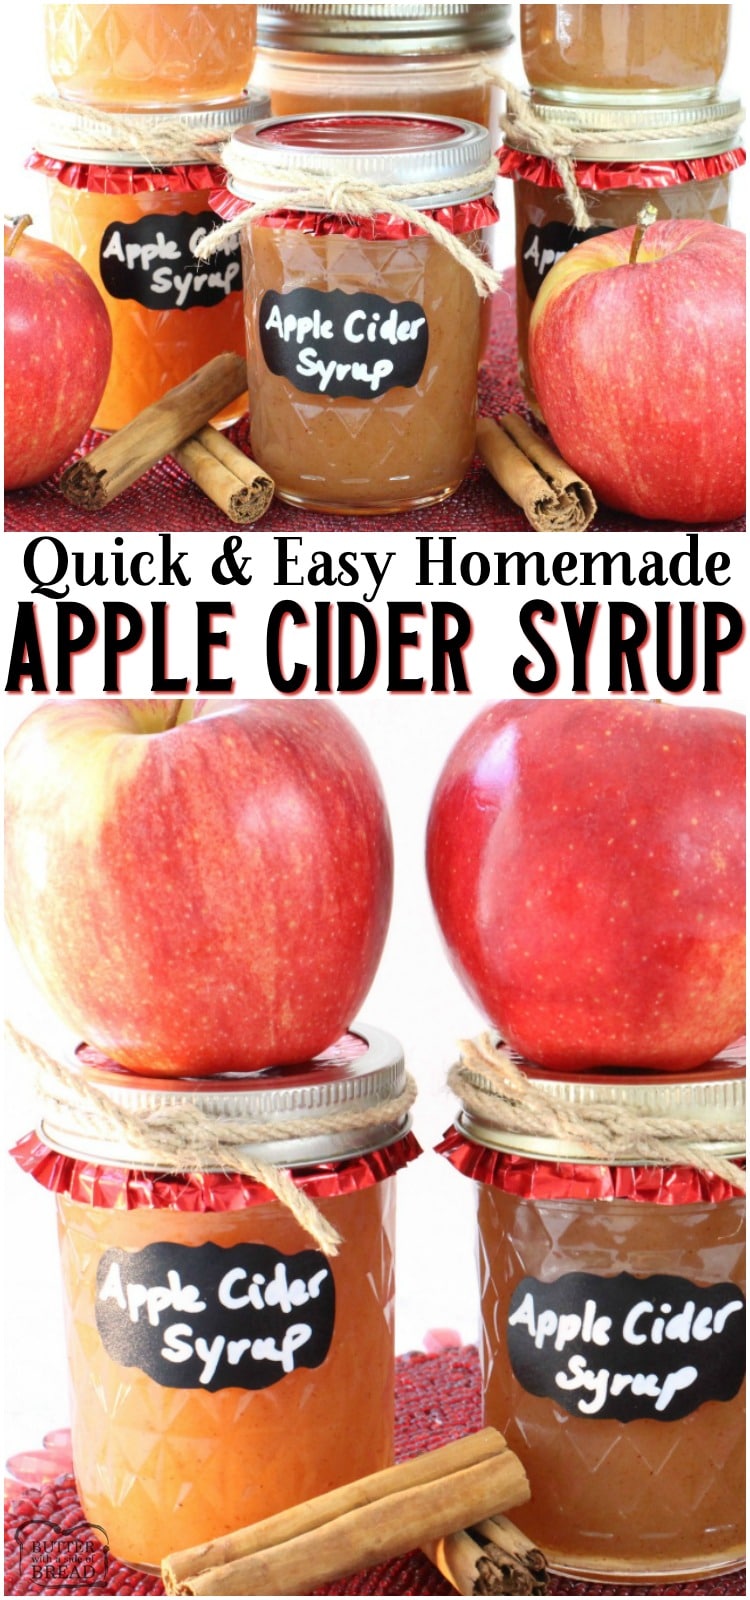 Easy Apple Cider Syrup made with simple ingredients including apple cider & pumpkin pie spice! This delightful homemade syrup recipe is easy to make and tastes wonderful. Perfect flavors for Fall breakfasts! #apples #applecider #syrup #homemade #breakfast #applecinnamon #easyrecipe from BUTTER WITH A SIDE OF BREAD